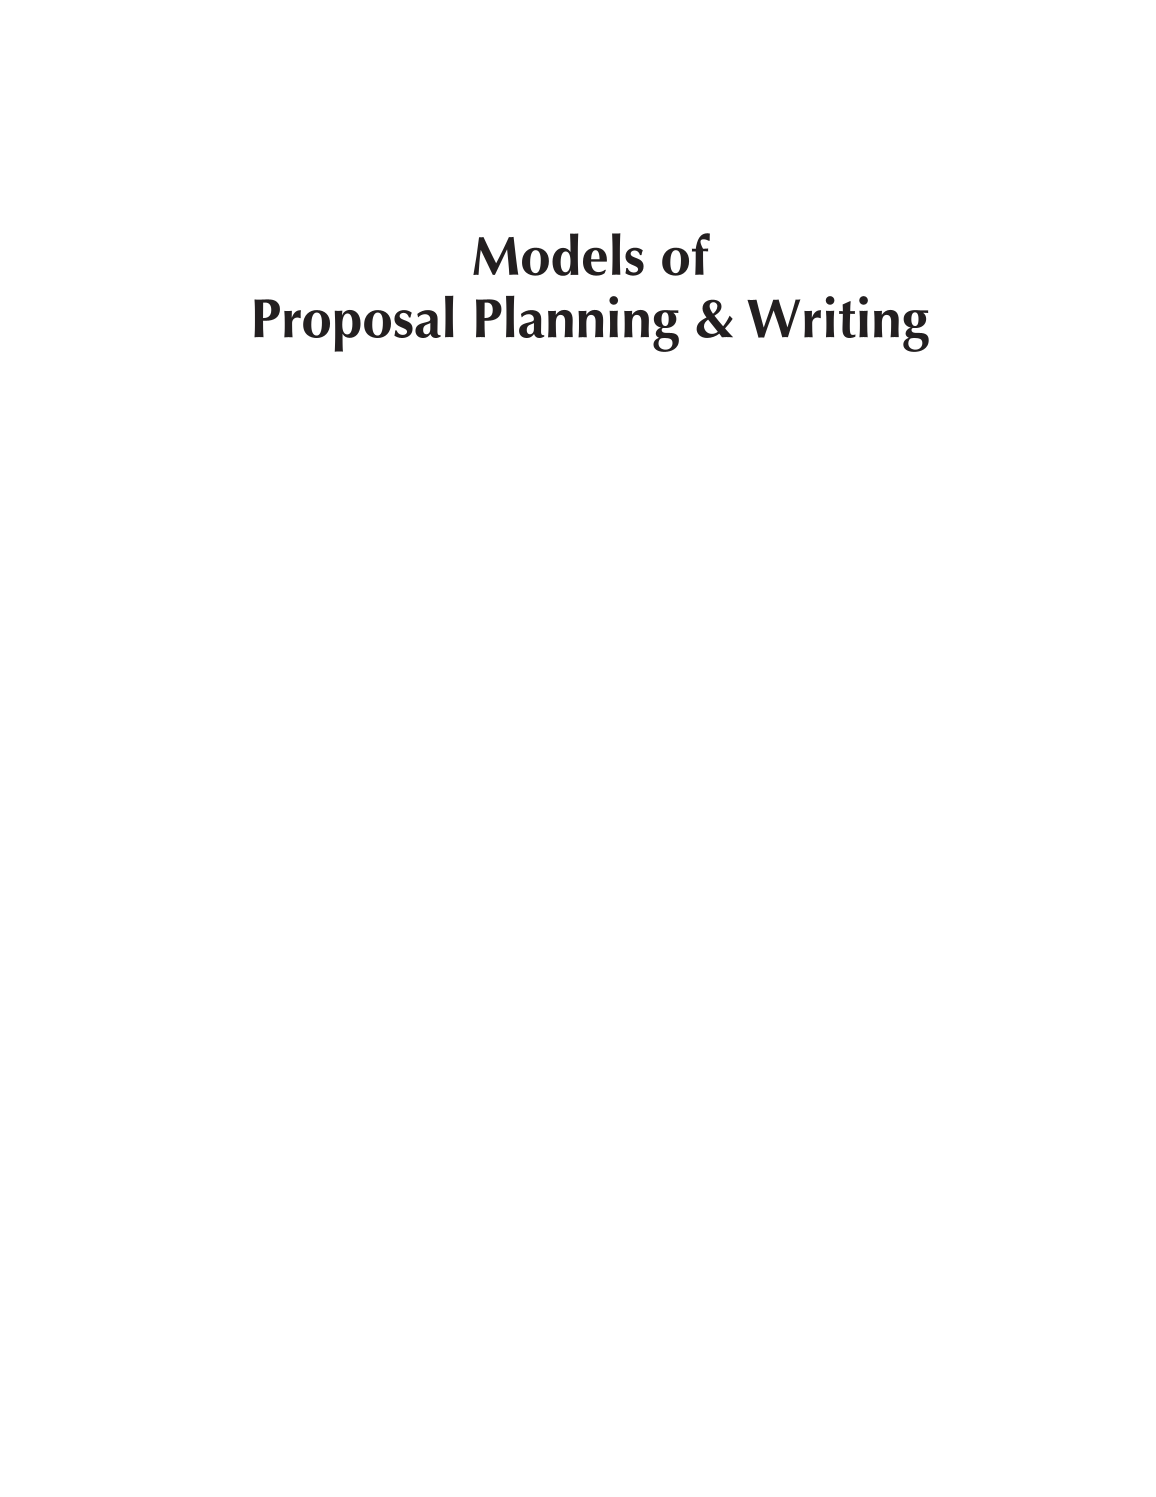 Models of Proposal Planning & Writing, 2nd Edition page i